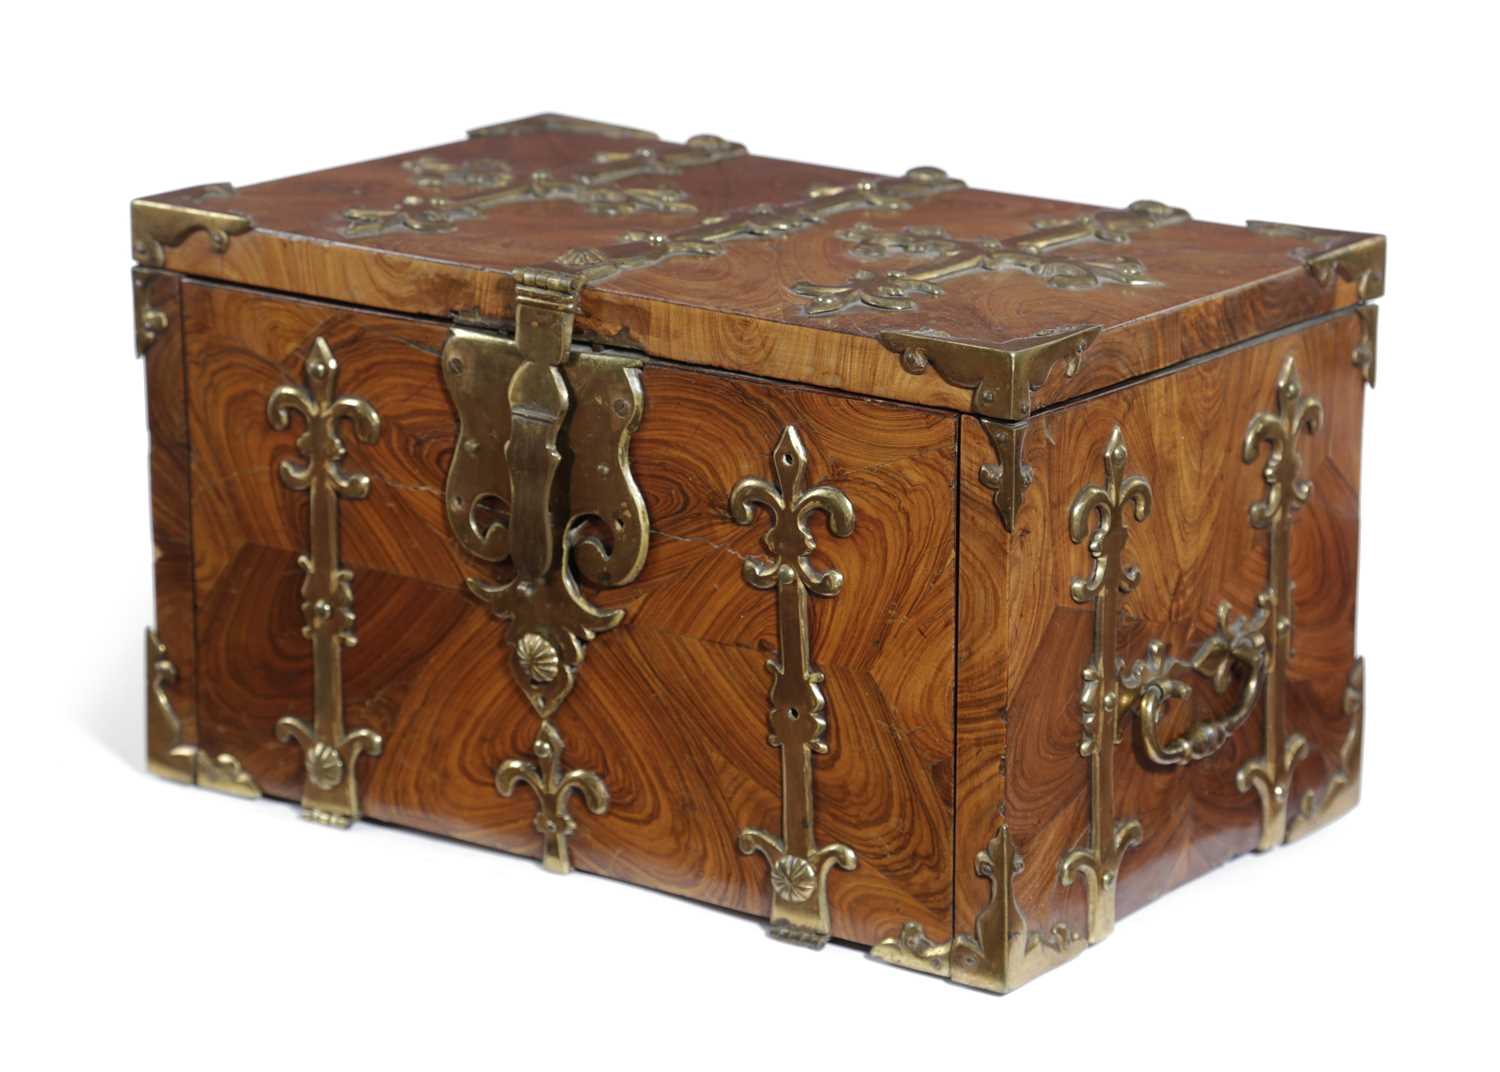 A KINGWOOD OYSTER VENEERED COFFRE FORT LATE 17TH / EARLY 18TH CENTURY with brass fleur-de-lis